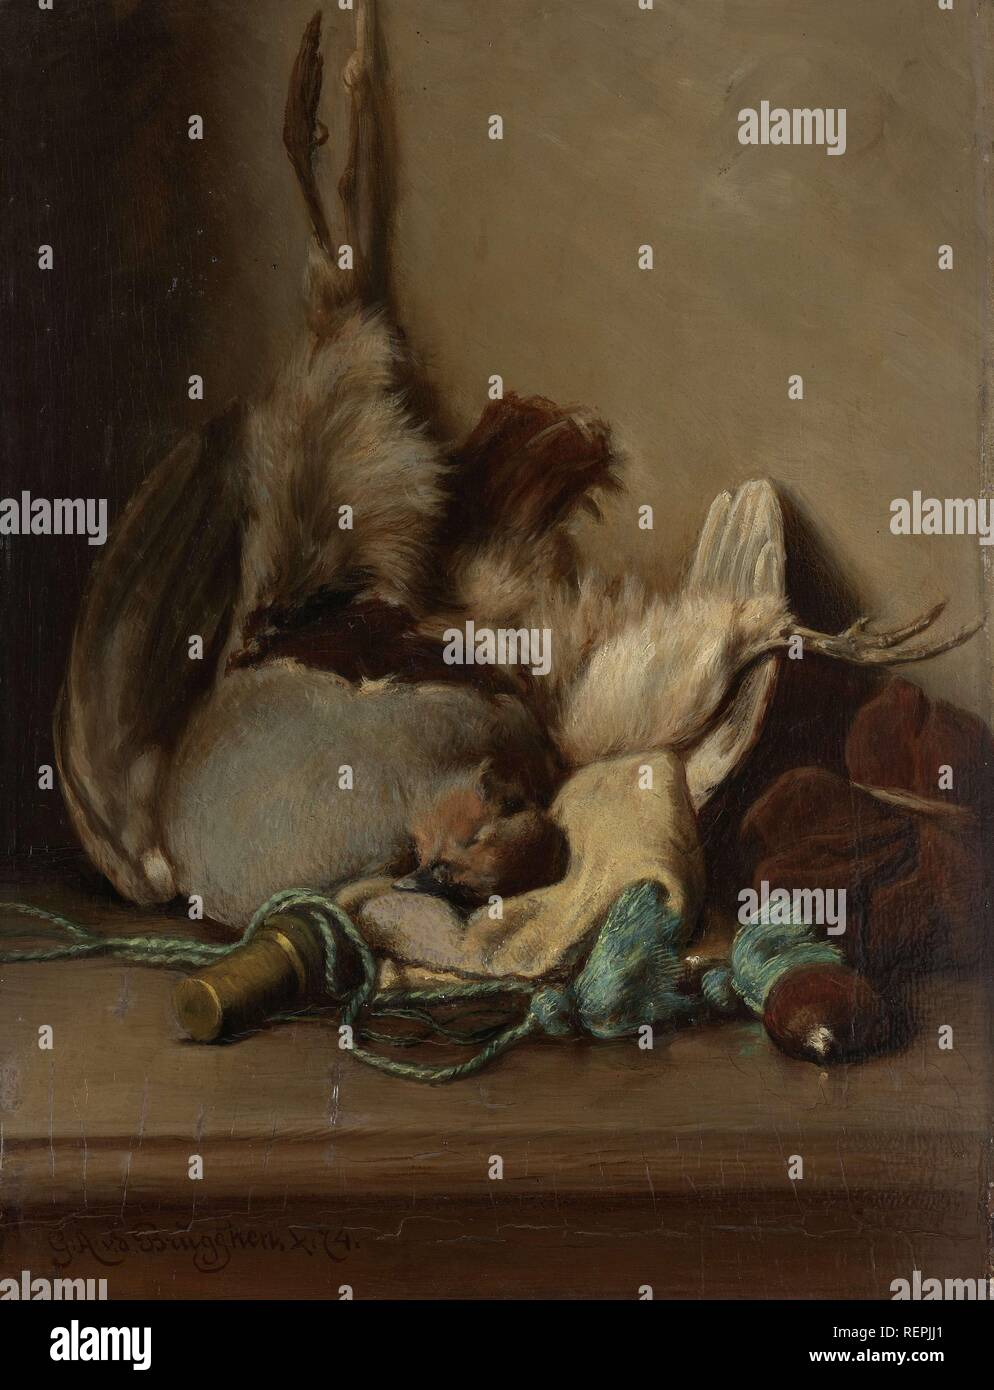 Still life with Wood Pigeon and Powder Horn. Dating: 1874. Measurements: h 35 cm × w 27 cm; d 8 cm. Museum: Rijksmuseum, Amsterdam. Author: Guillaume Anne van der Brugghen. Stock Photo